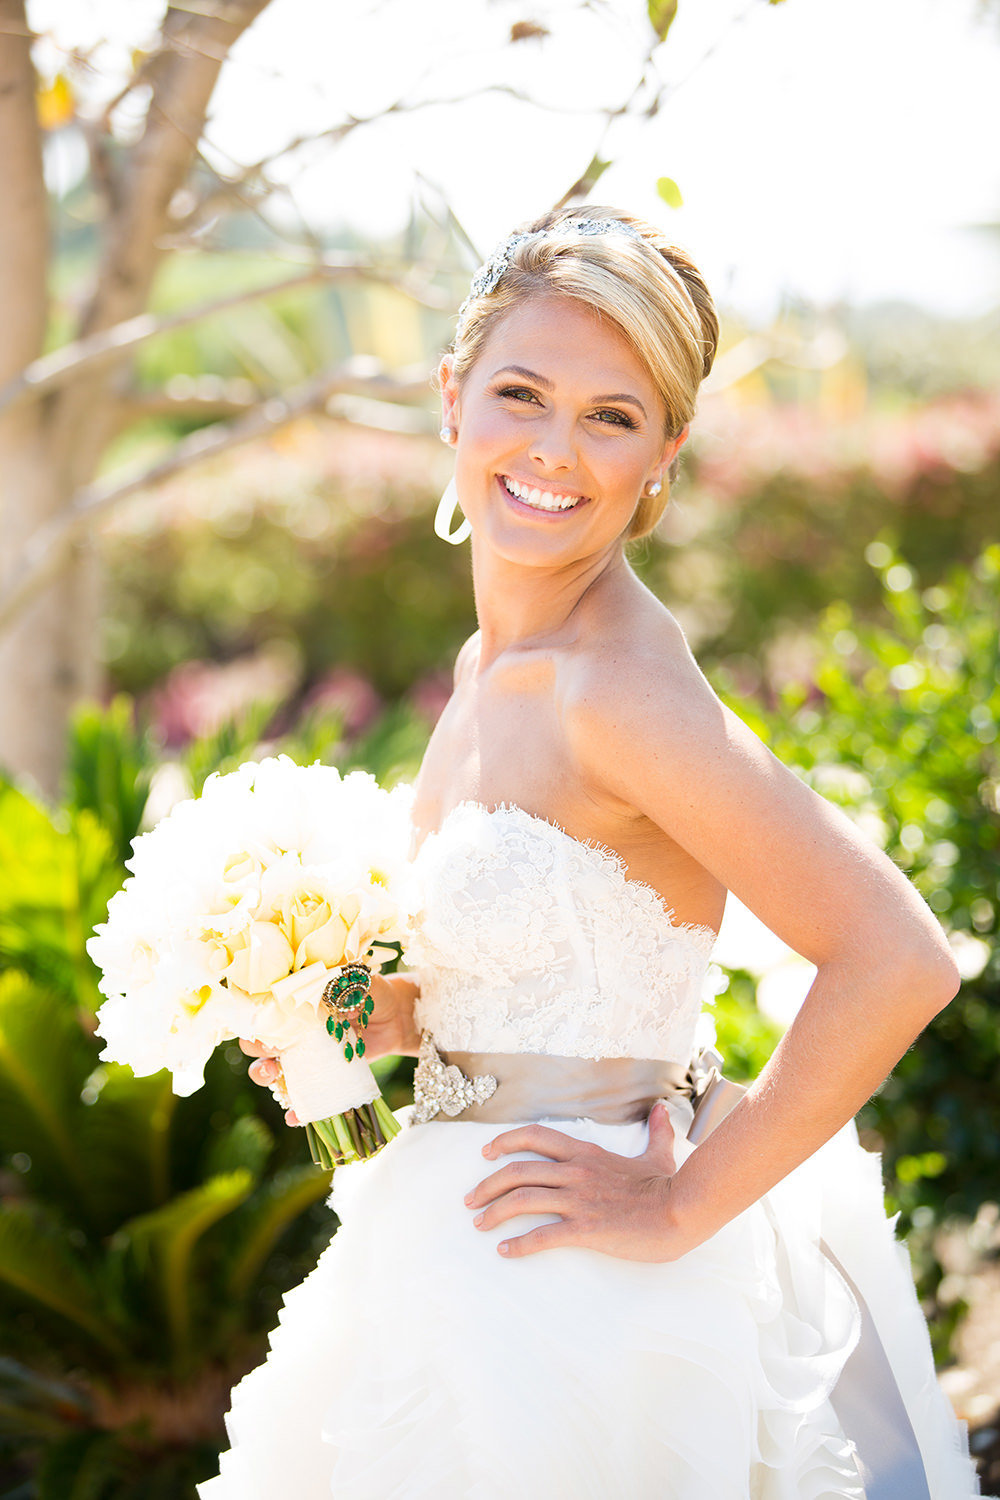 one of the most beautiful brides you will ever see